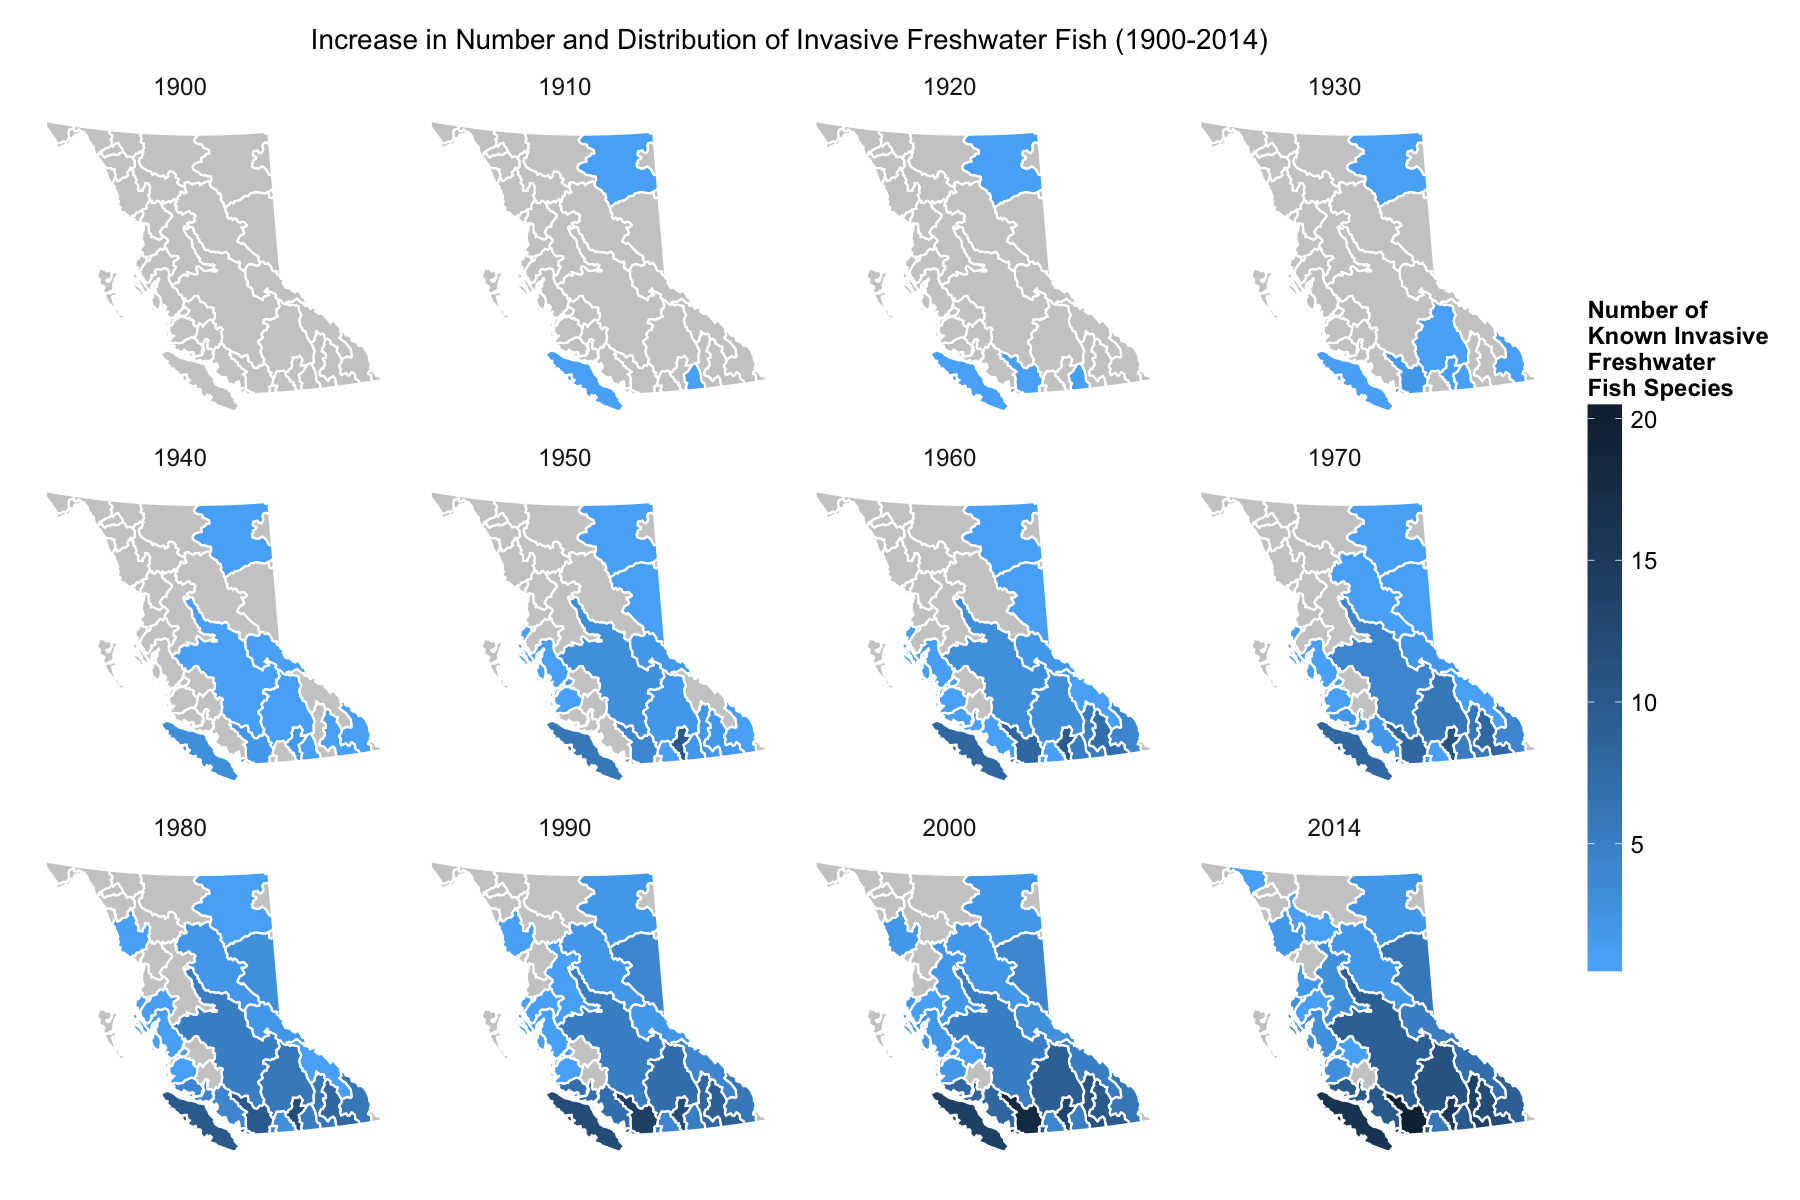 Maps showing the increase in number and distribution of invasive freshwater fish by ecological drainage units in B.C.